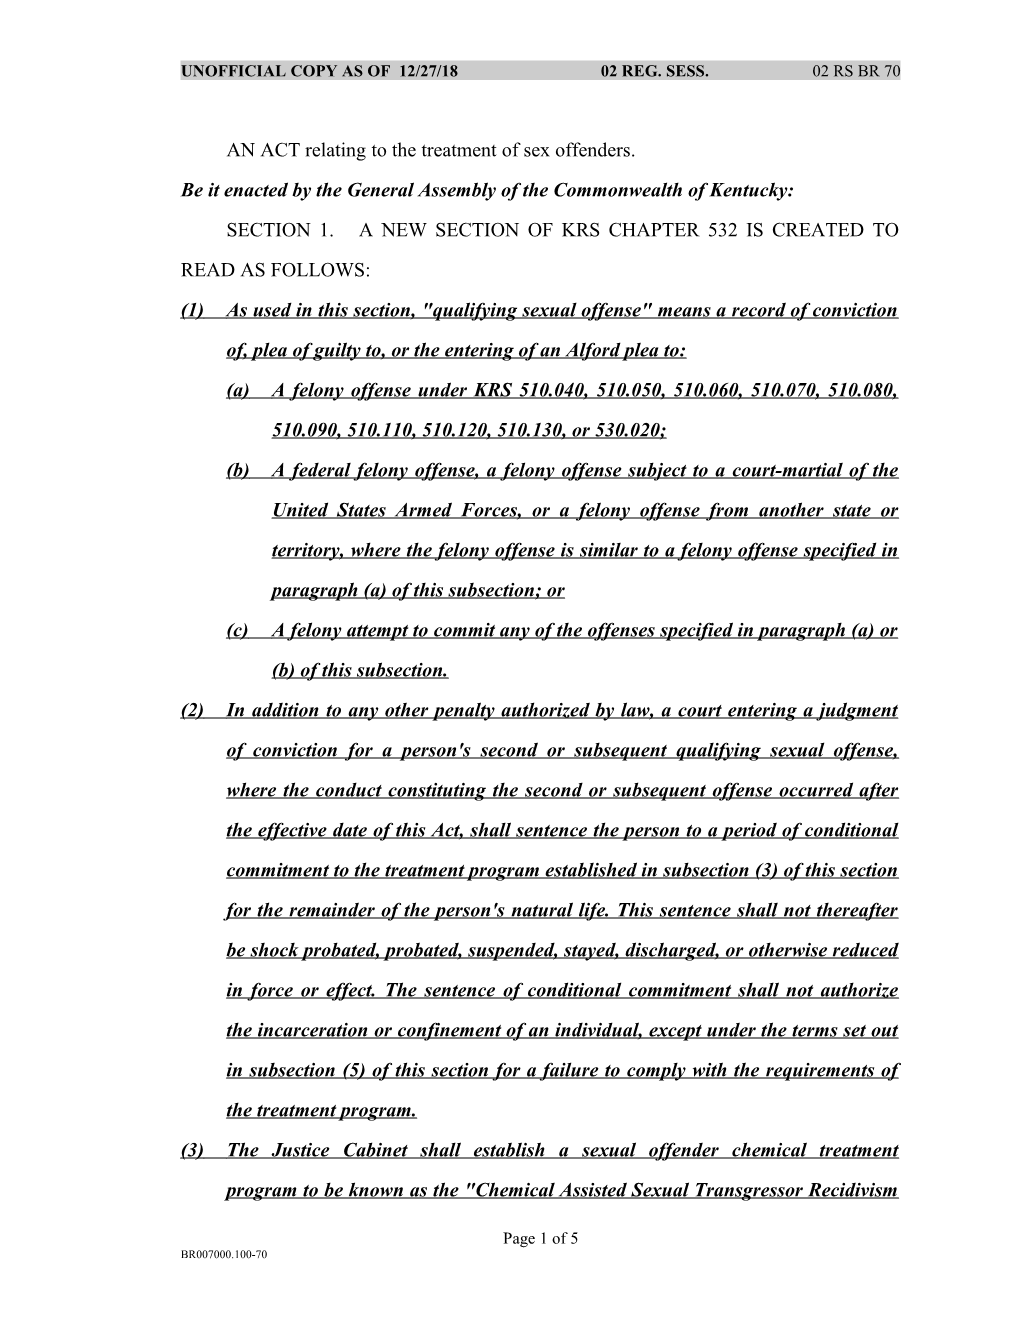 AN ACT Relating to the Treatment of Sex Offenders